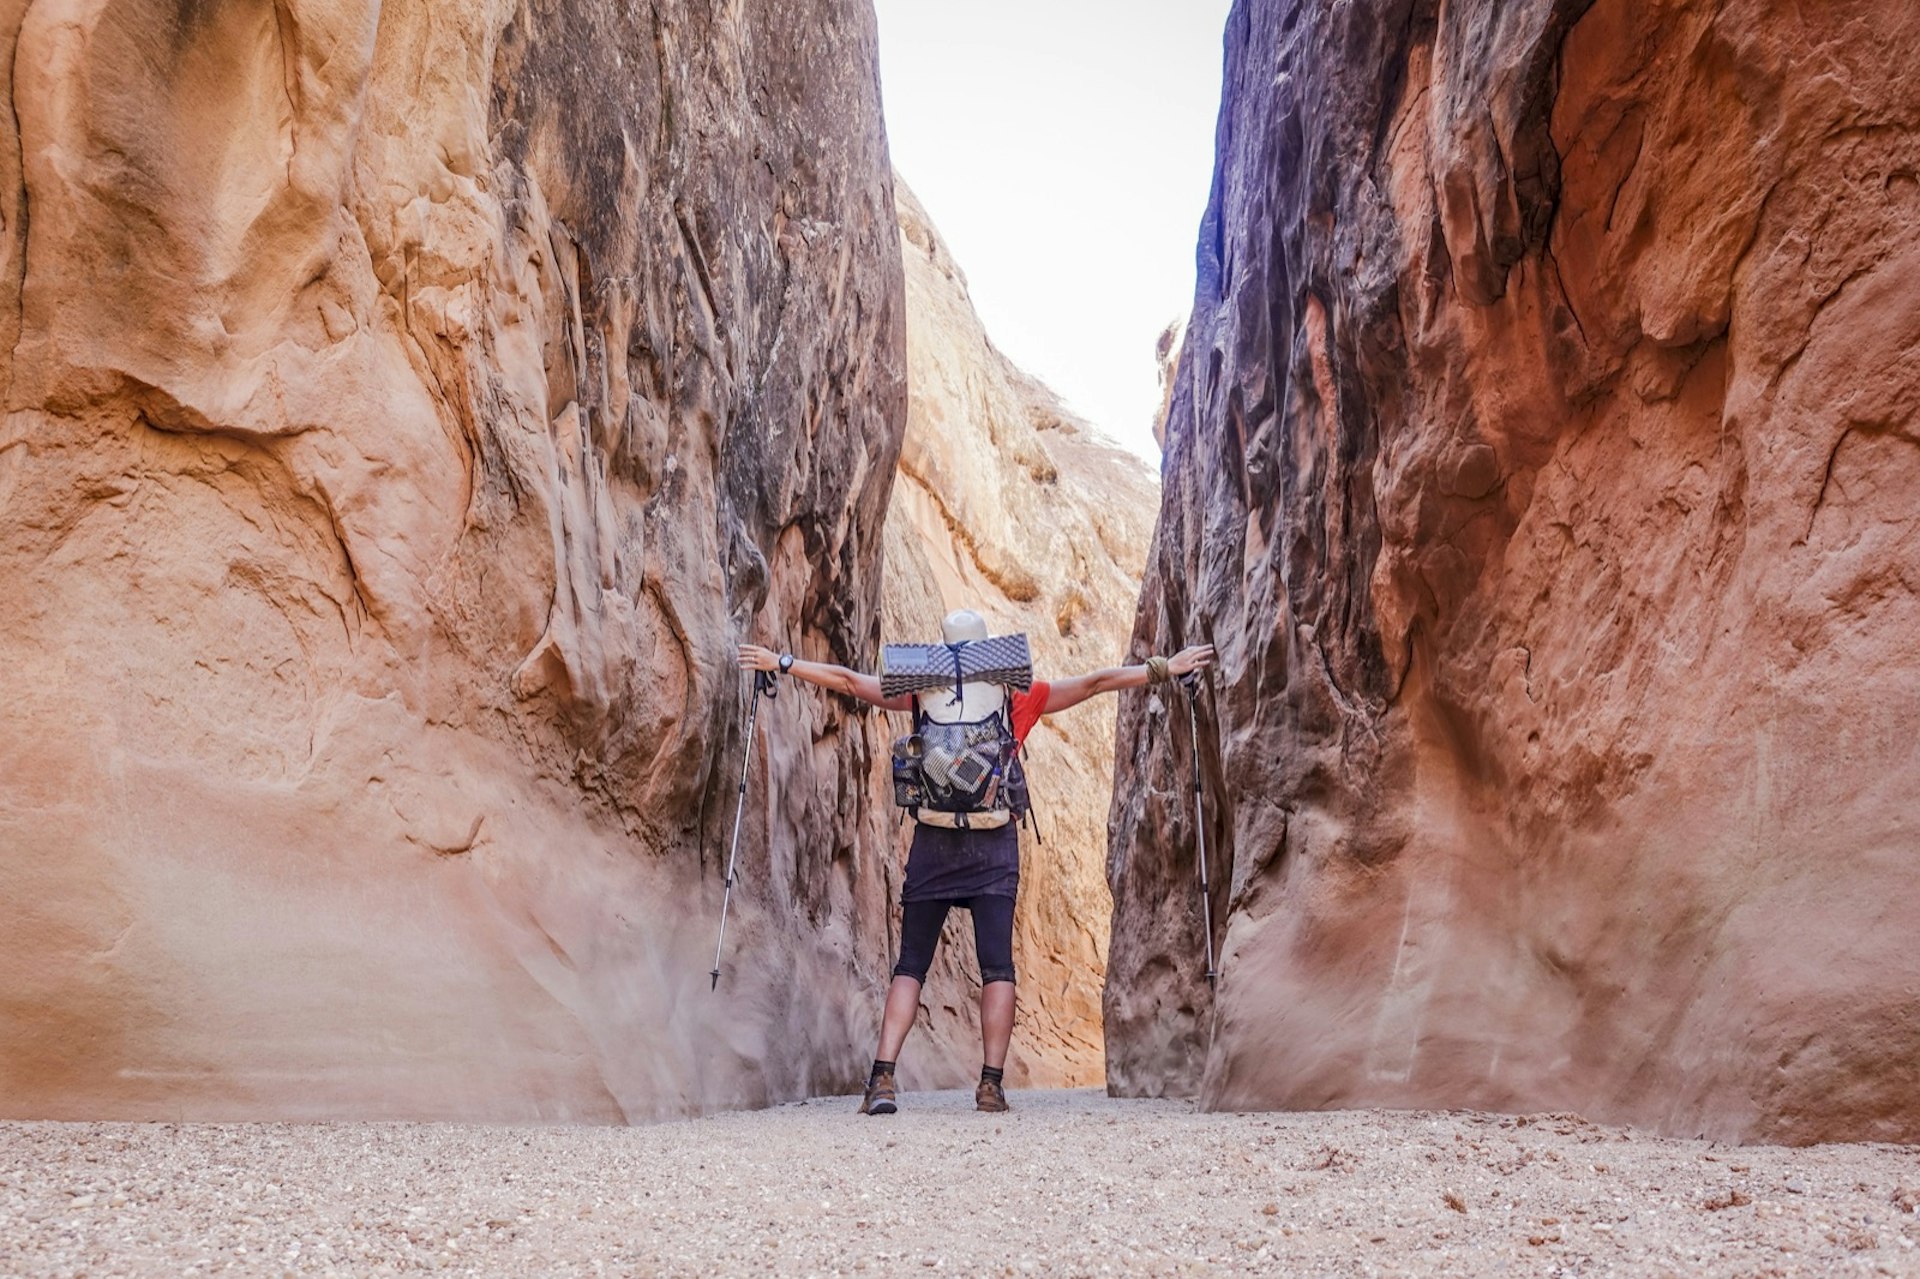 A backpacker touches both walls in a narrow canyon